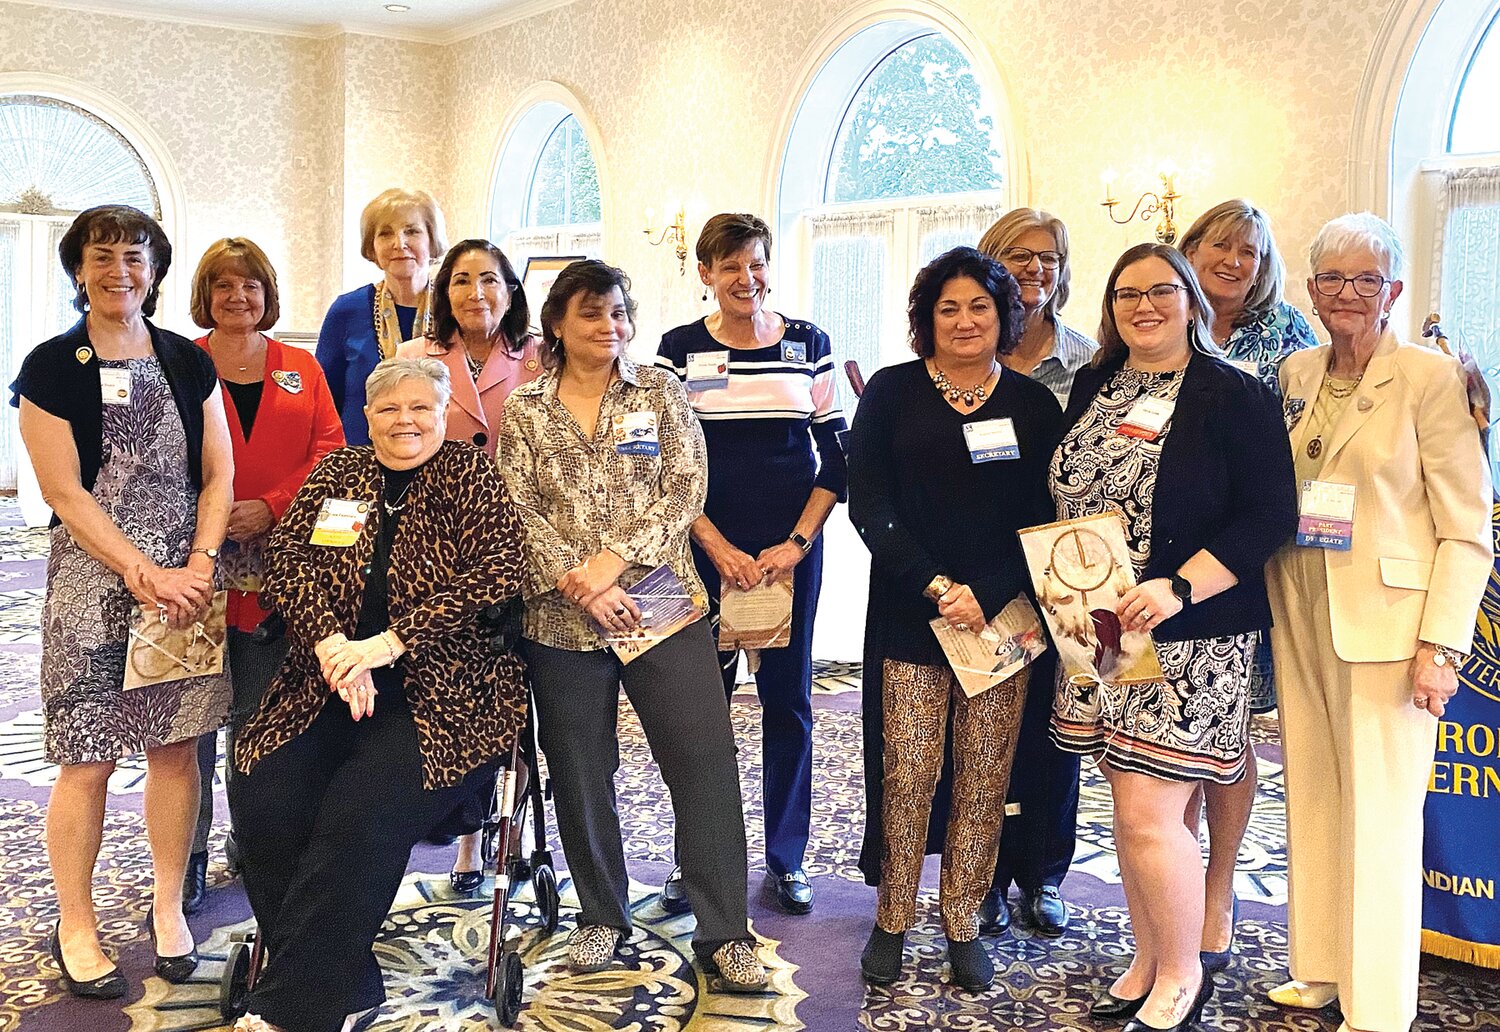 Incoming Soroptimist International of Indian Rock Inc. board officers include, from left: front row, Julia Ivers and Gina Fuscellaro, directors; Eileen Finnigan and Angela Moffa, recording secretaries; Alexis Wallace, second vice president; Eileen Conner, delegate; second row, Patti Cullen, director; Lynn Detwiler, delegate; Carol Zemnick and Diane Smith, directors; Tina Engle, treasurer; Kathy Waddington, president. Not shown are Jenny Lichtner, first vice president; Maureen Menarde, corresponding secretary; and Nancy Montvydas, delegate.